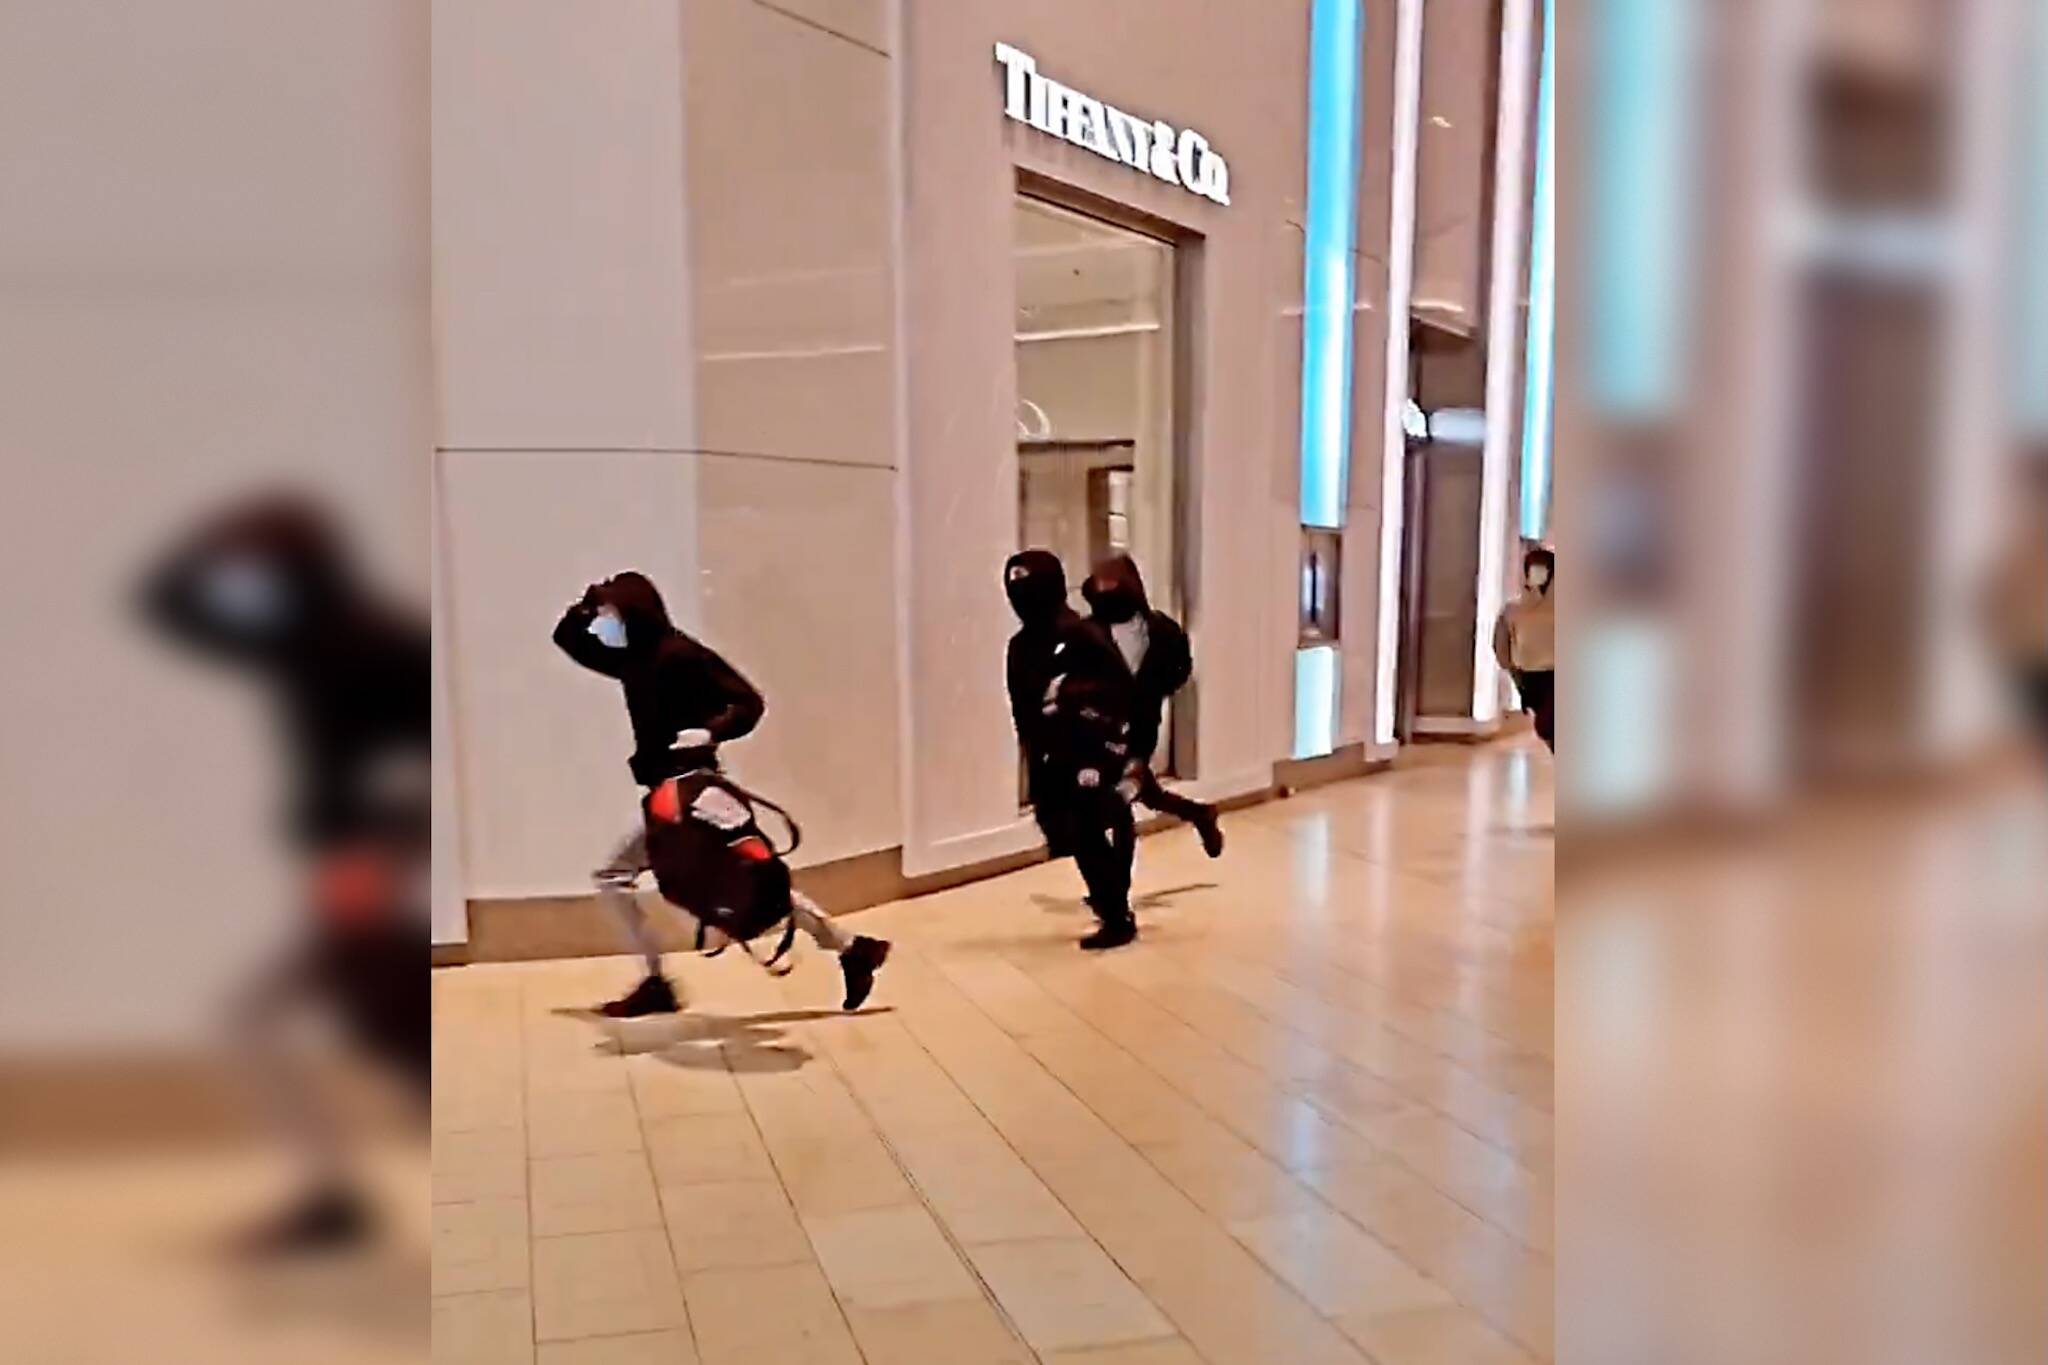 yorkdale robbery